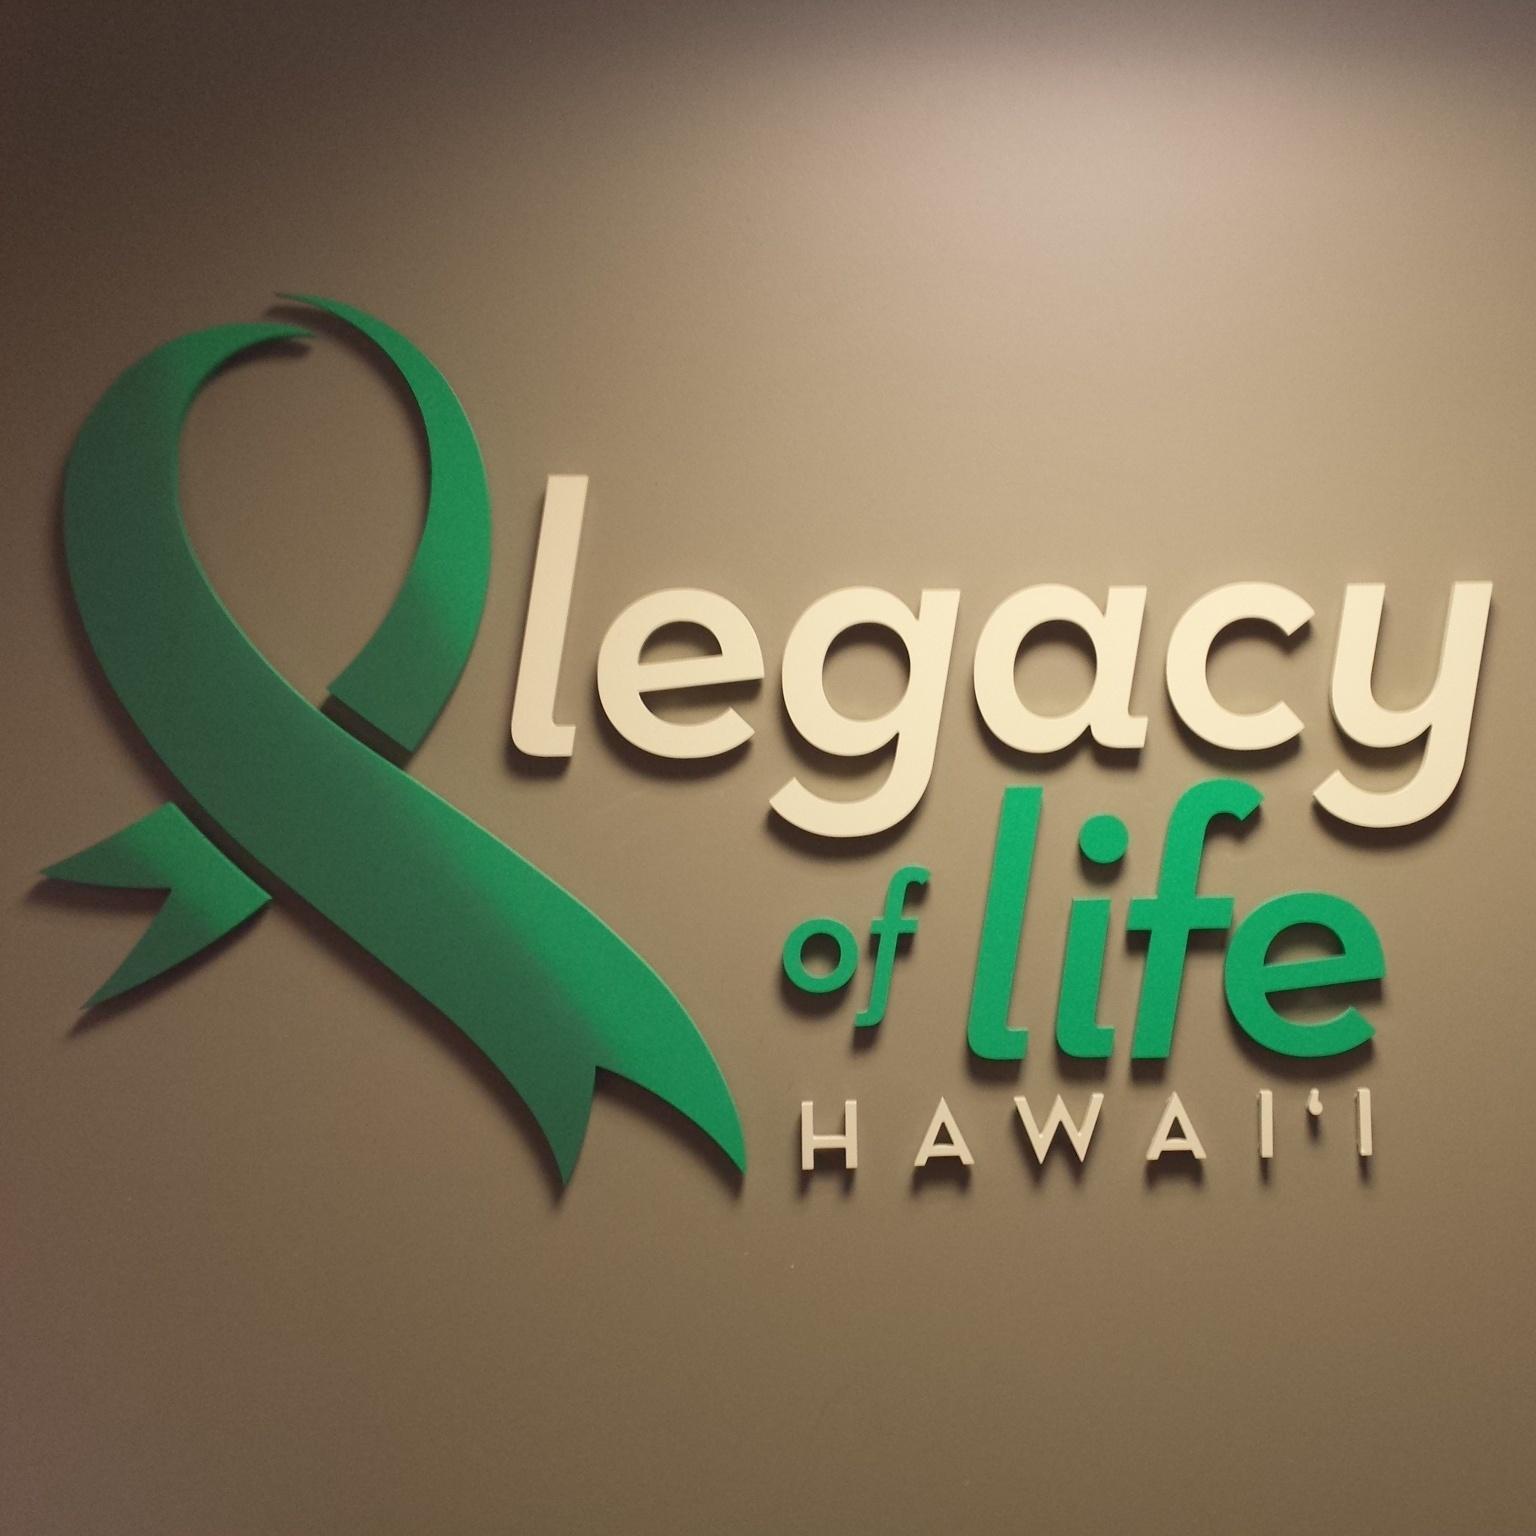 Life is worth giving. You can make a difference. Show your aloha and give the gift of life through organ and tissue donation.